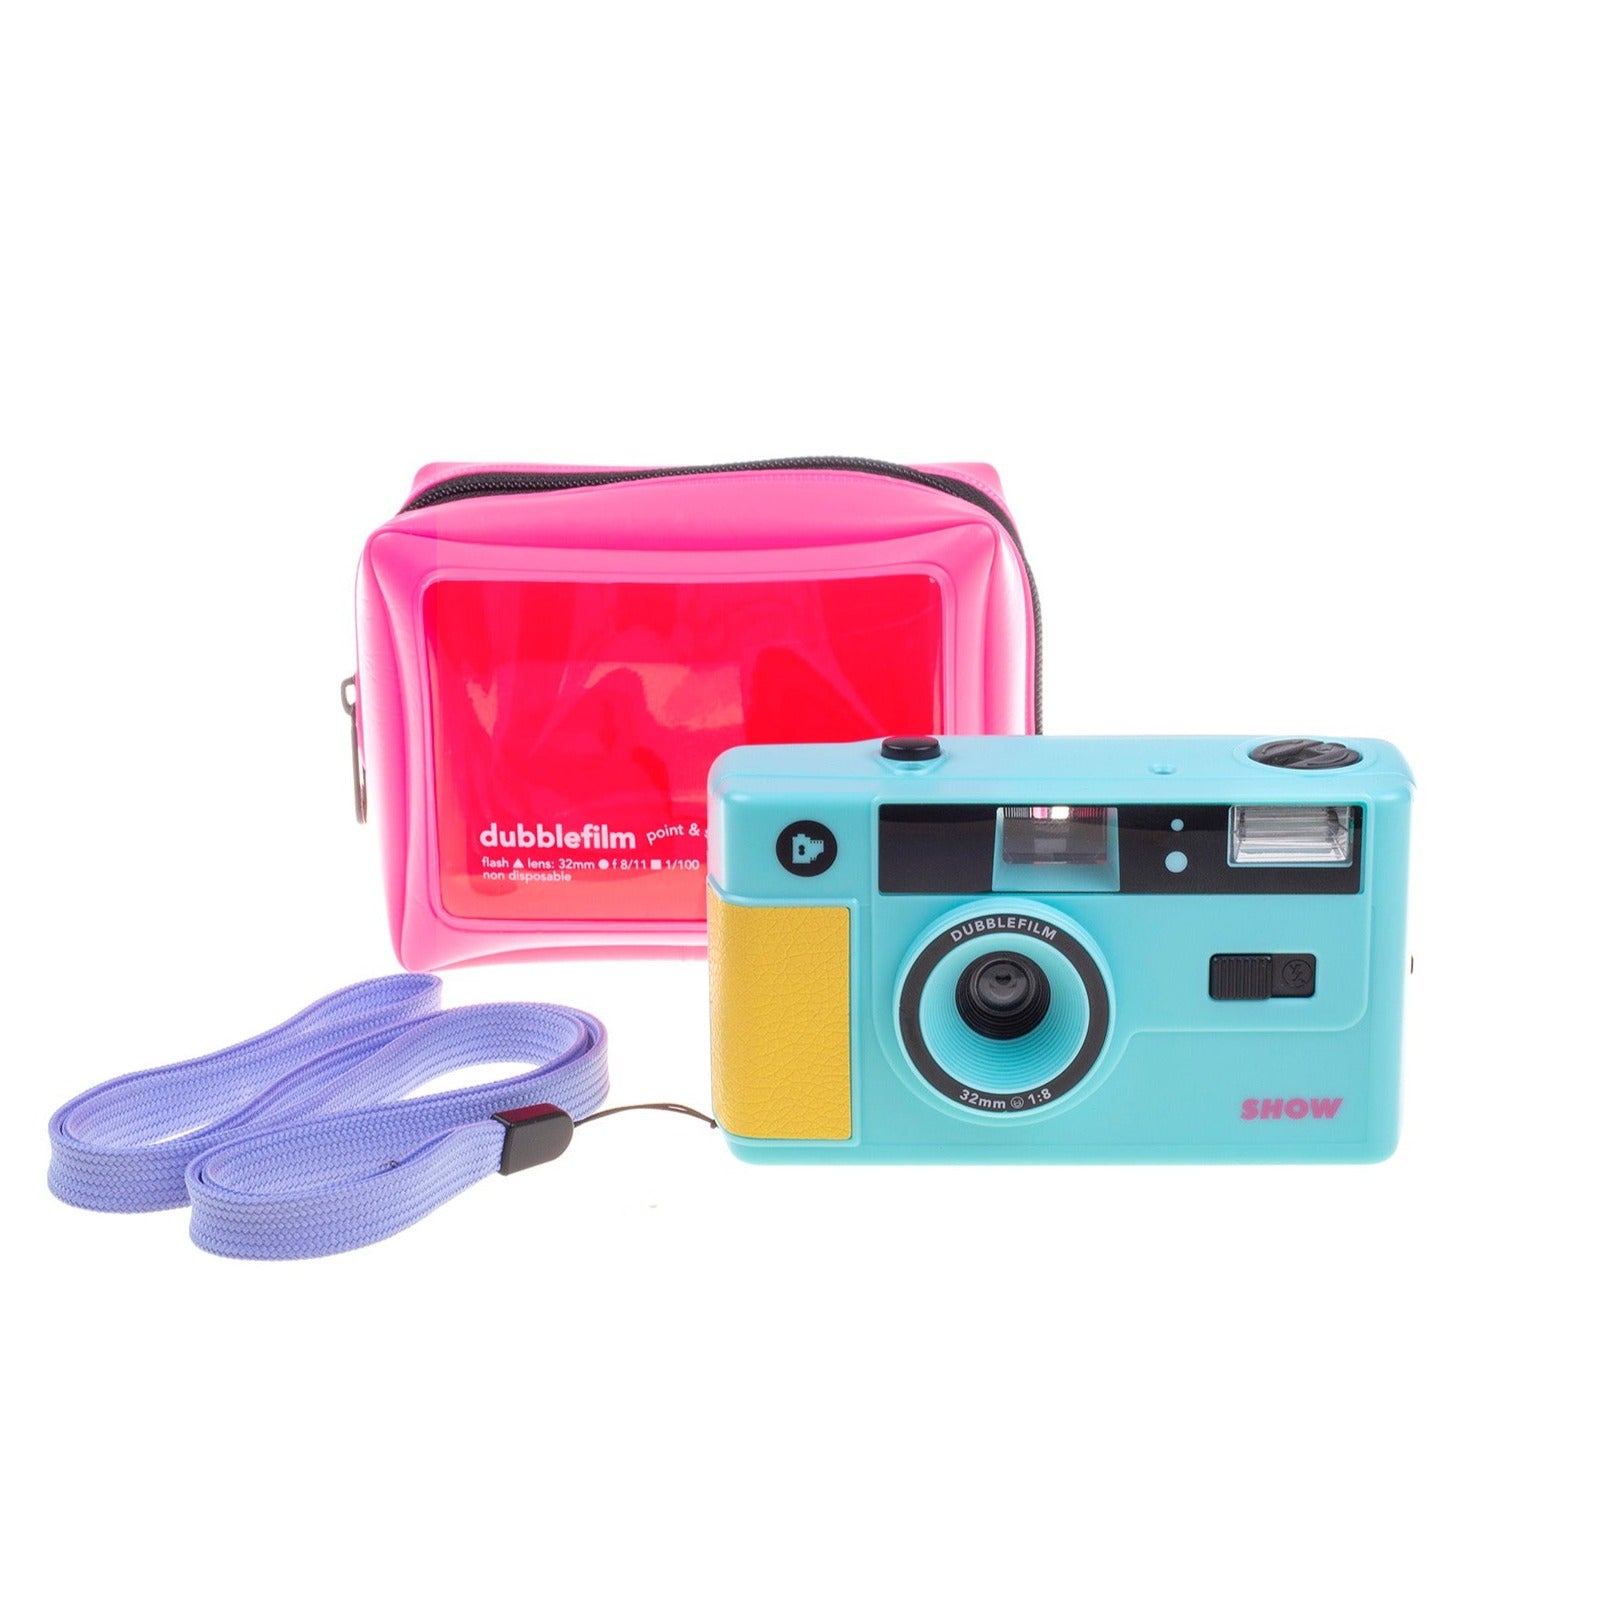 SHOW camera - Turquoise